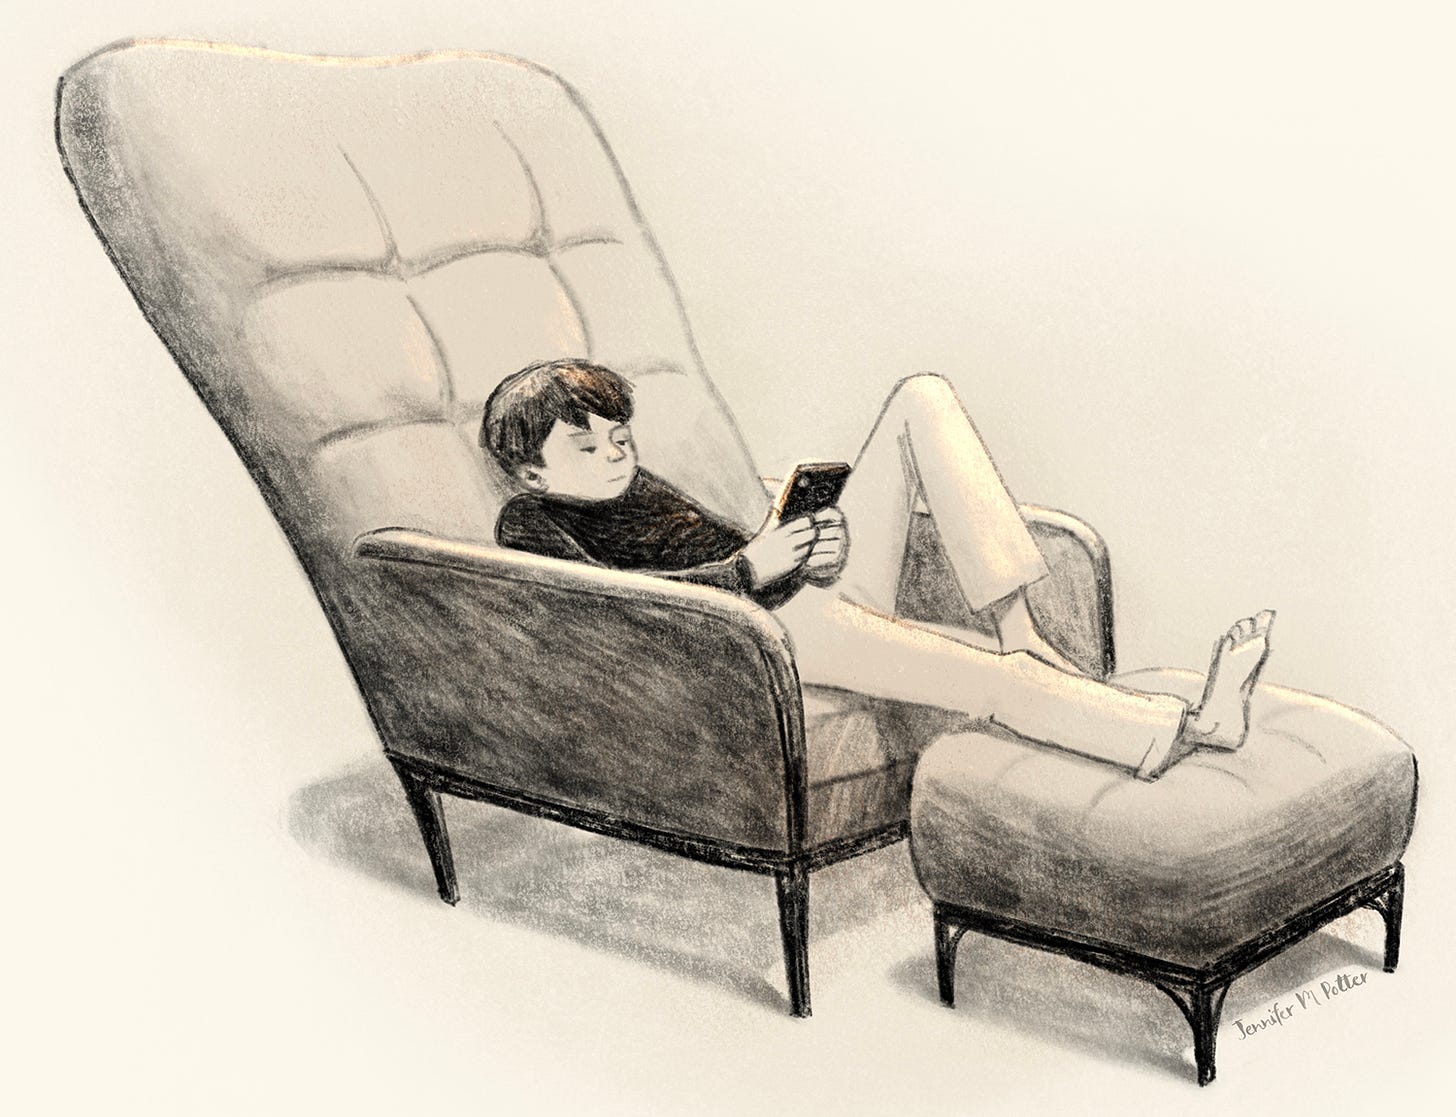 Illustration by Jennifer M Potter of a tween boy sitting on a comfy chair and looking at his phone